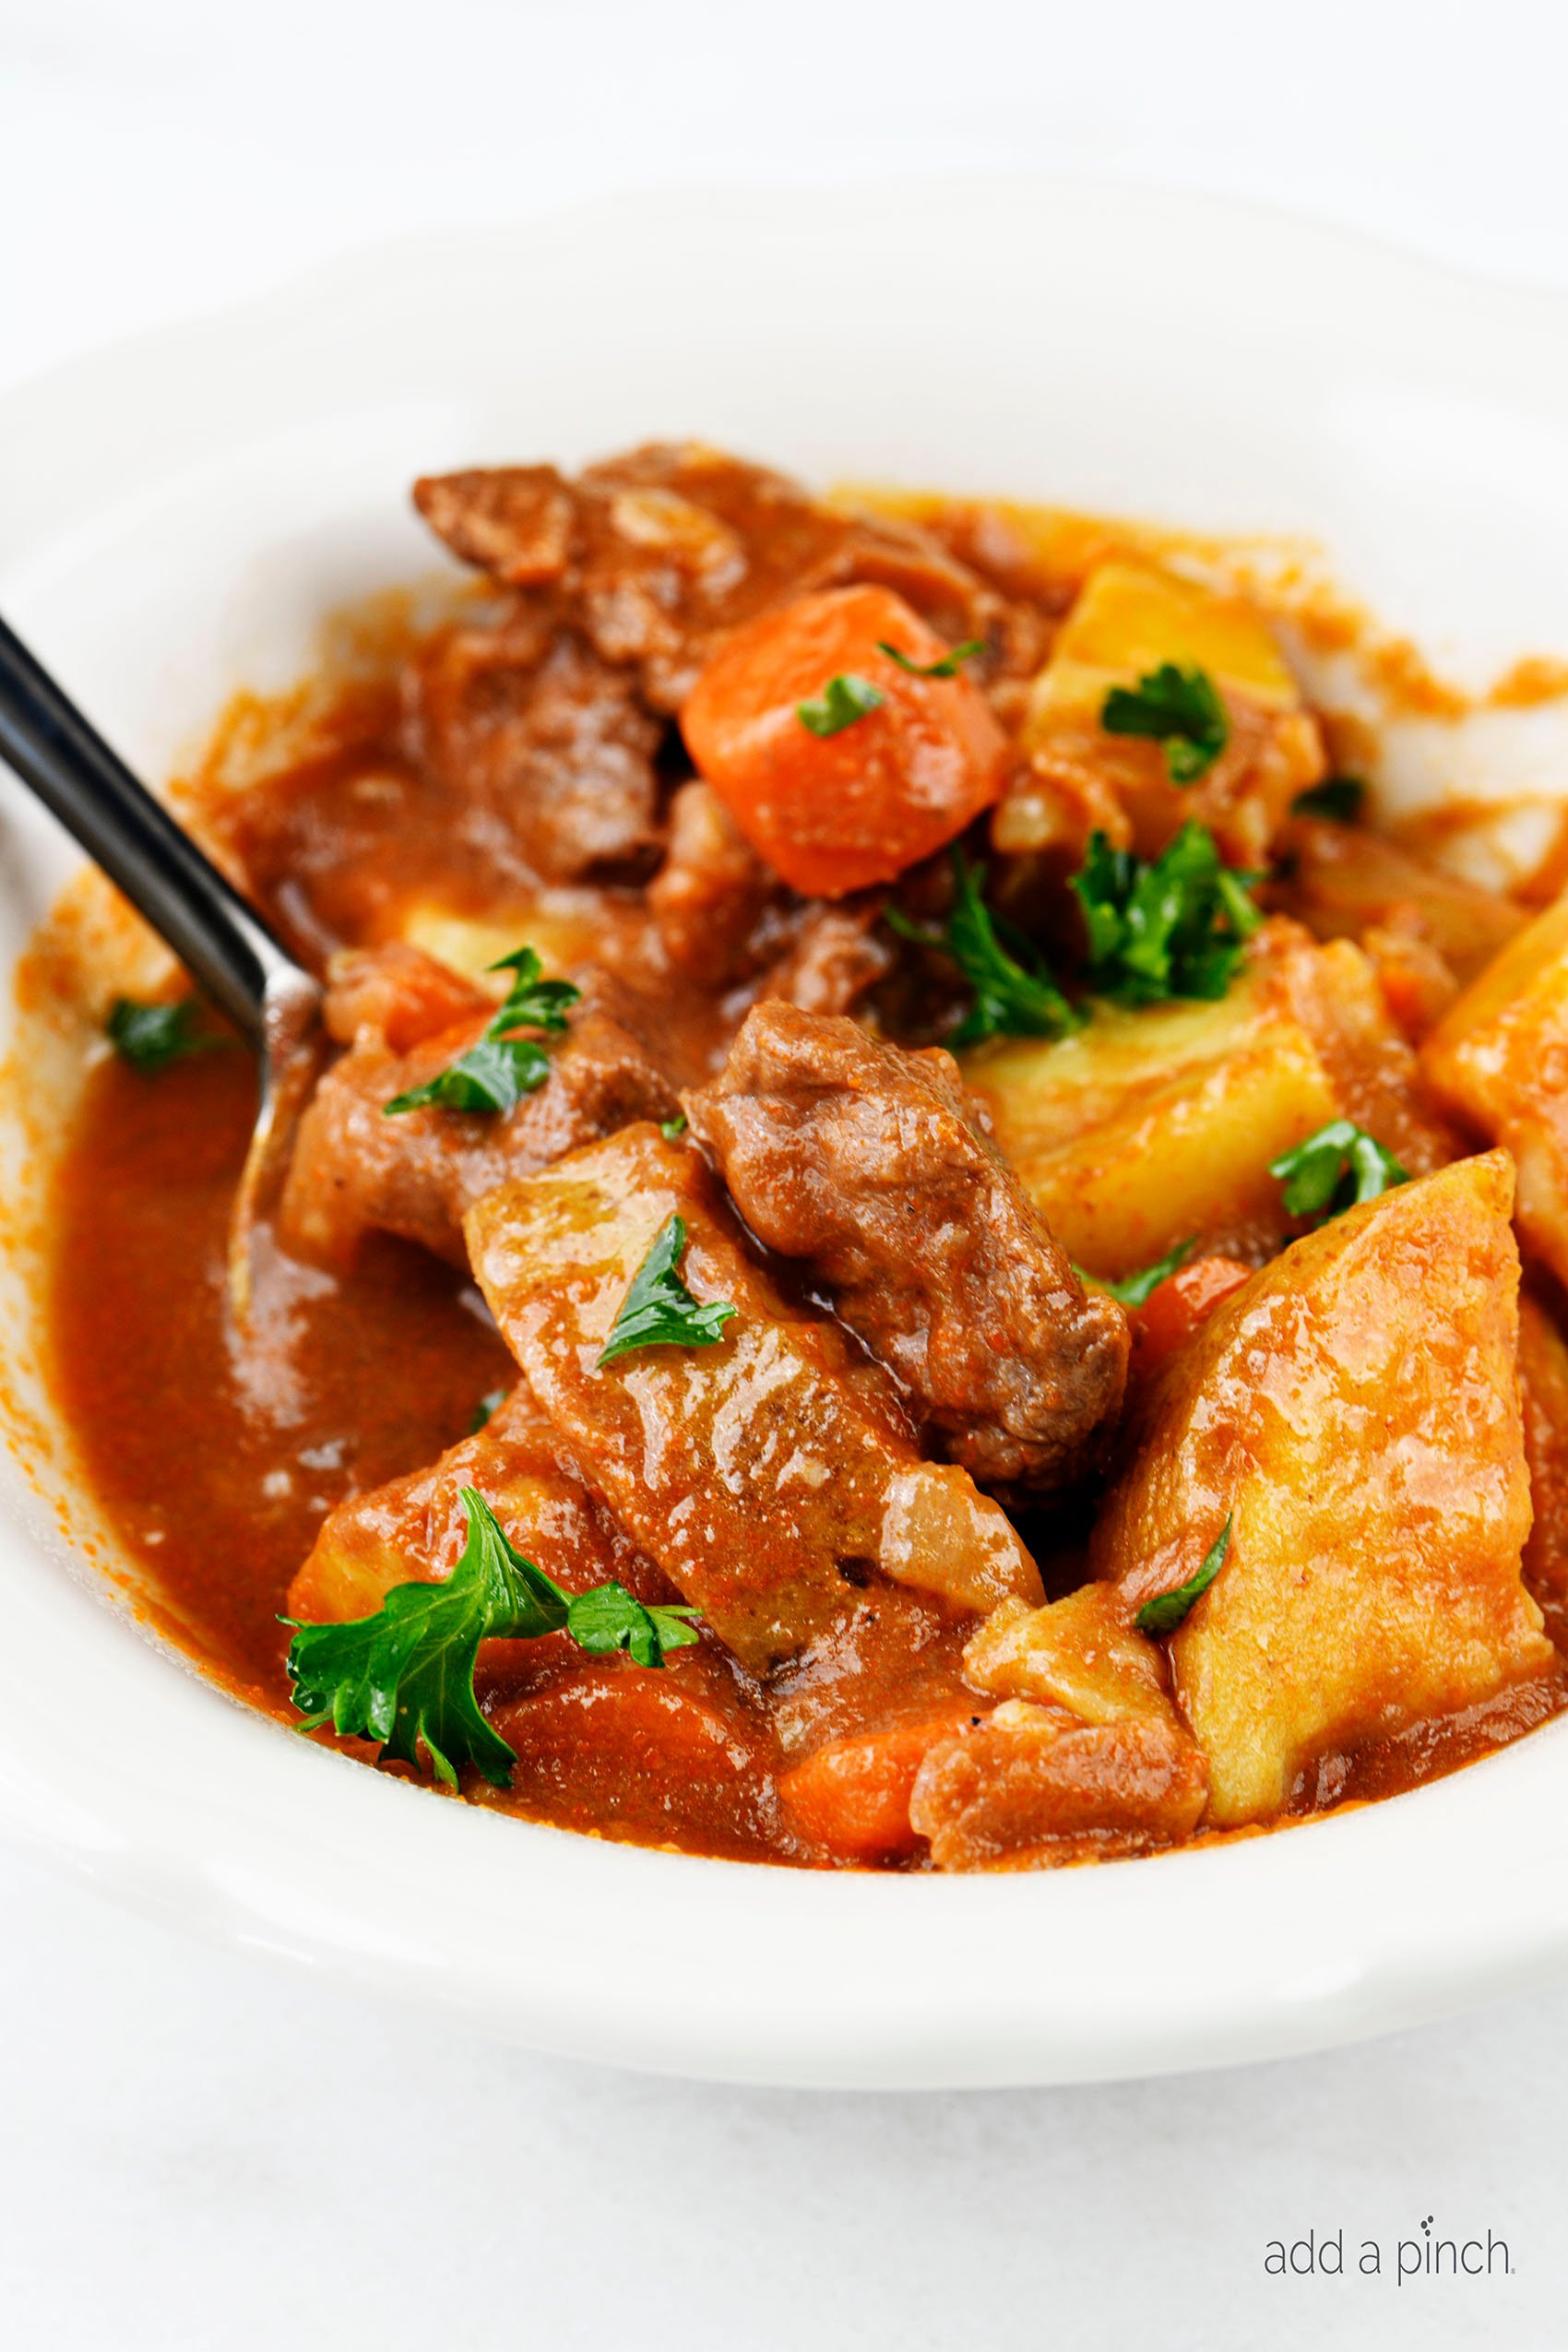 Stew Beef Recipes
 The Best Instant Pot Beef Stew Recipe Add a Pinch